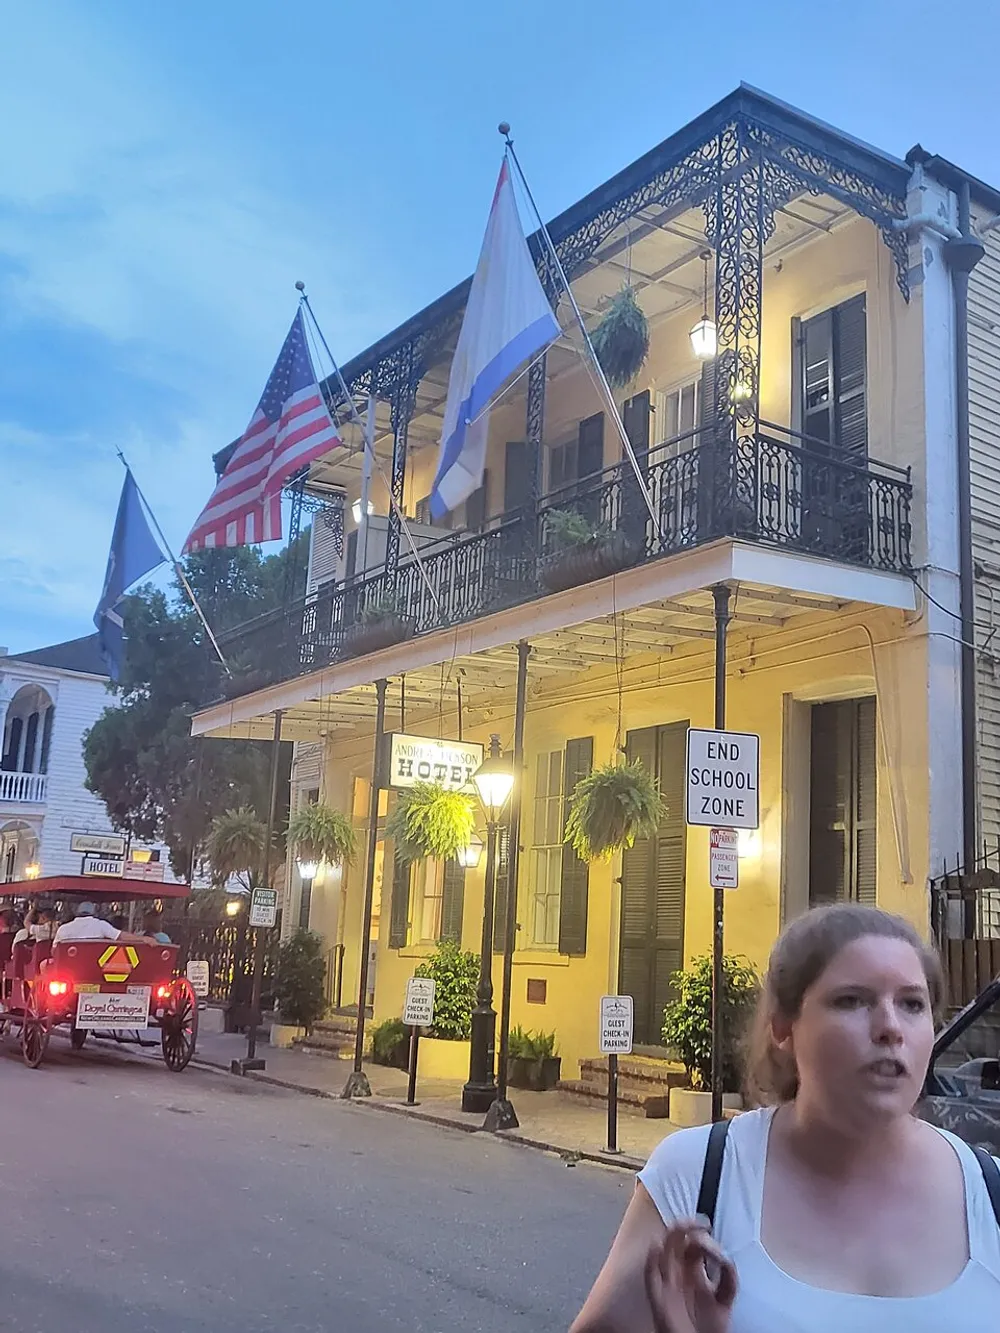 The image shows a two-story building with a balcony adorned with wrought-iron railings flying several flags with a sign indicating its a hotel a pedestrian on the street and a horse-drawn carriage passing by in the early evening